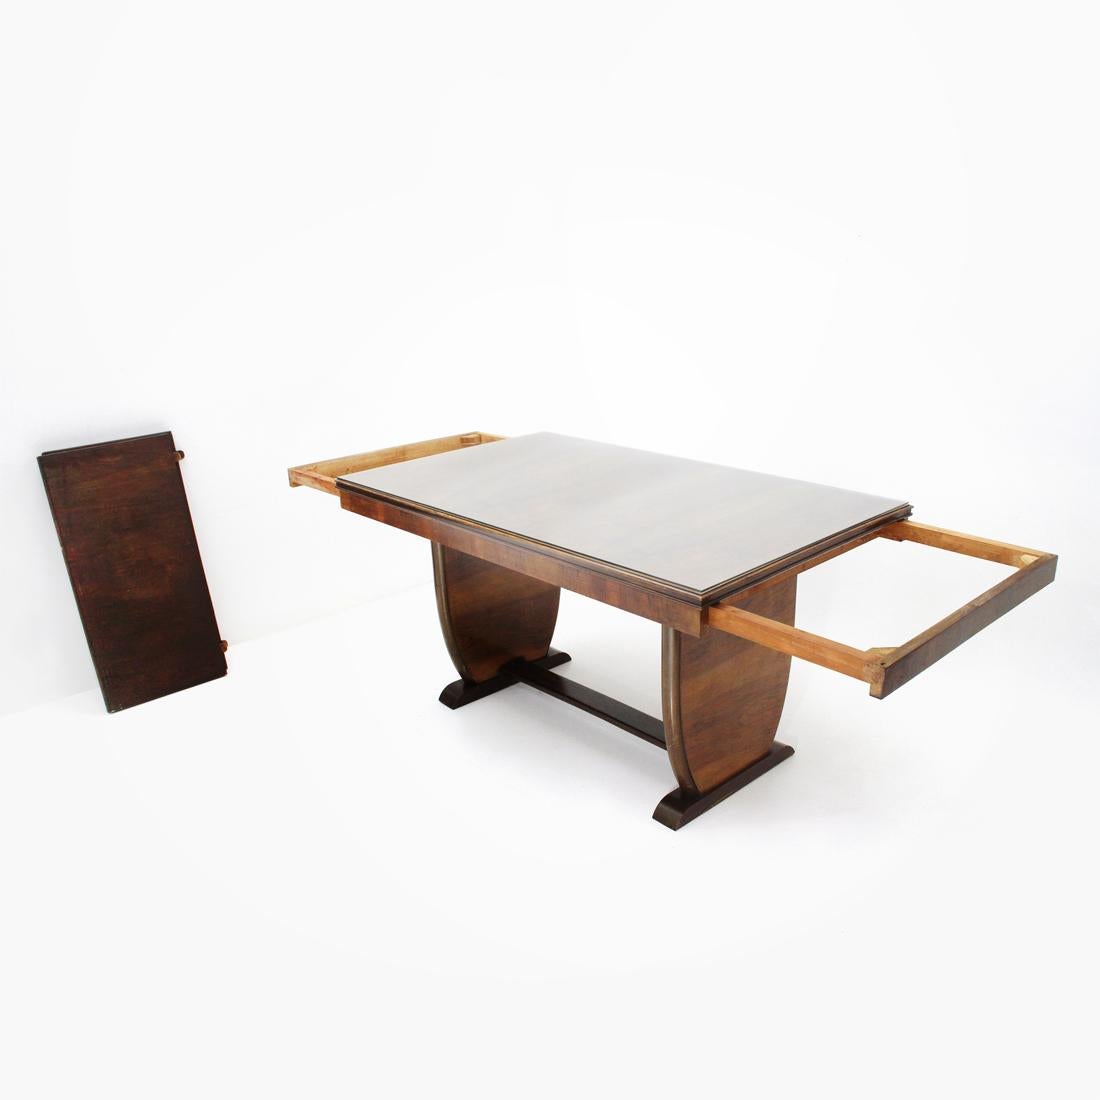 Italian Wooden Dining Table, 1940s For Sale 7